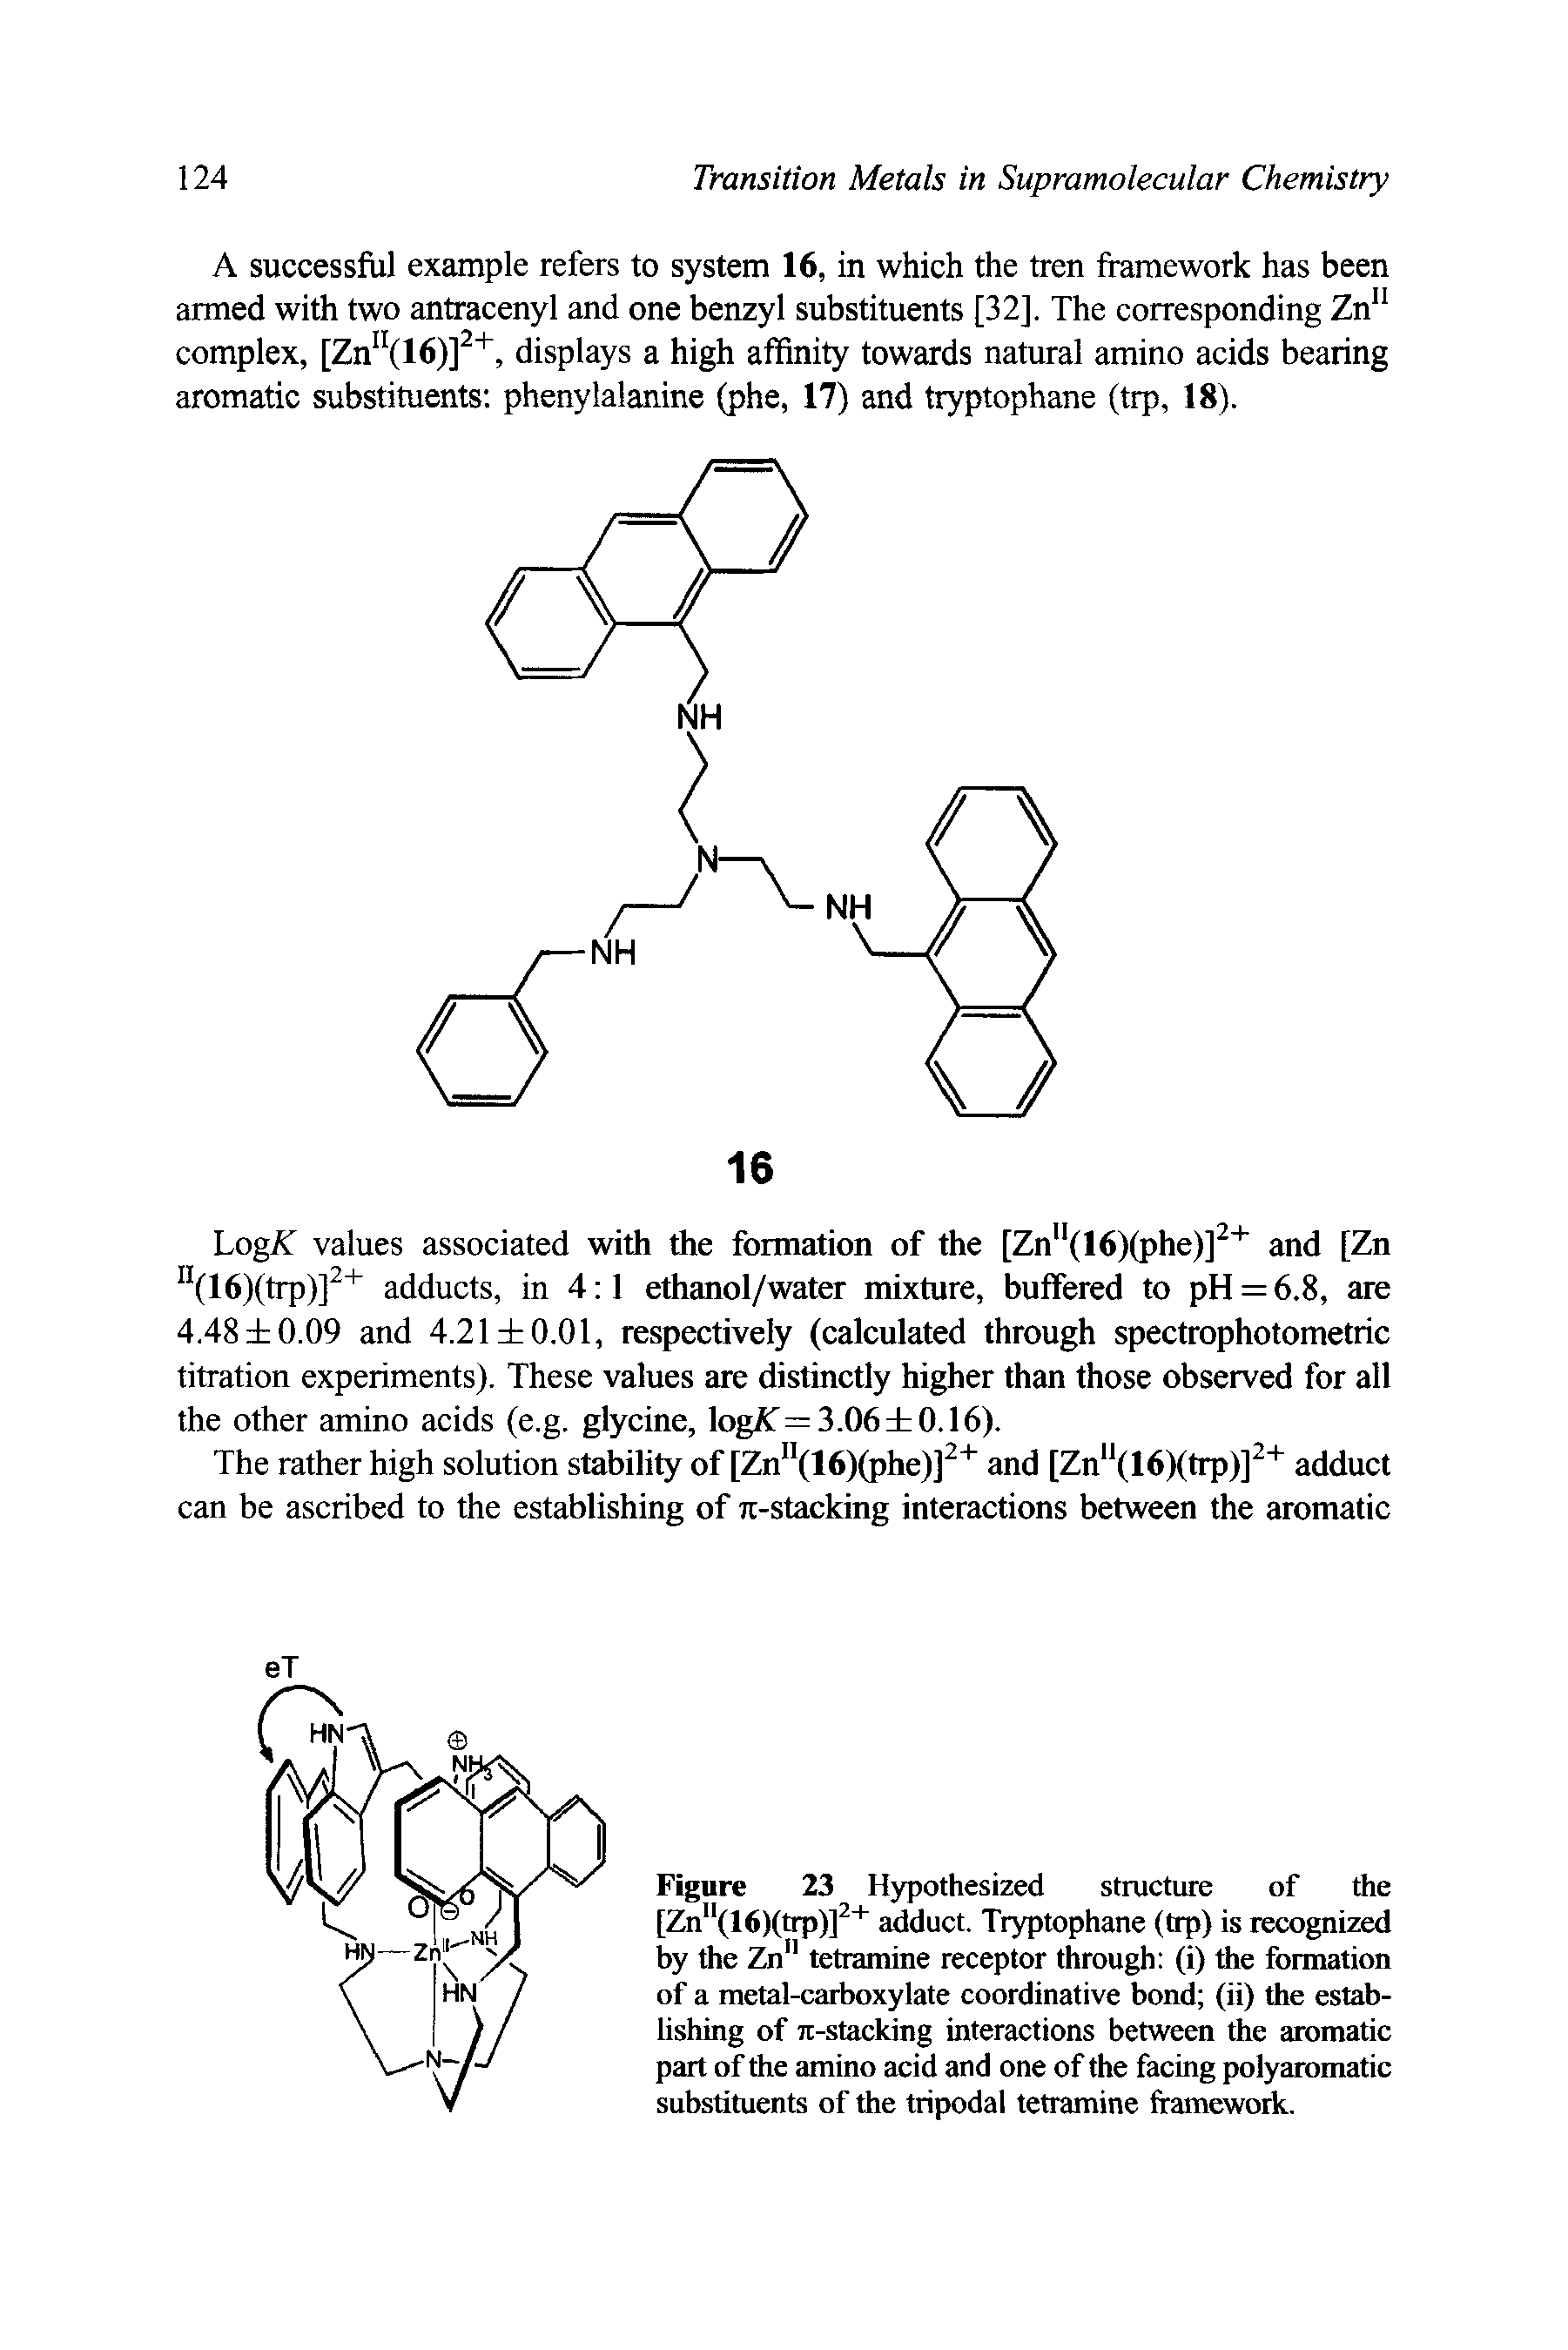 Figure 23 Hypothesized structure of the [Zn"(16)(trp)] adduct. Tryptophane (trp) is recognized by the Zn" tetramine receptor through (i) the formation of a metal-carboxylate coordinative bond (ii) the establishing of 7t-stacking interactions between the aromatic part of the amino acid and one of the facing polyaromatic substituents of the tripodal tetramine framework.